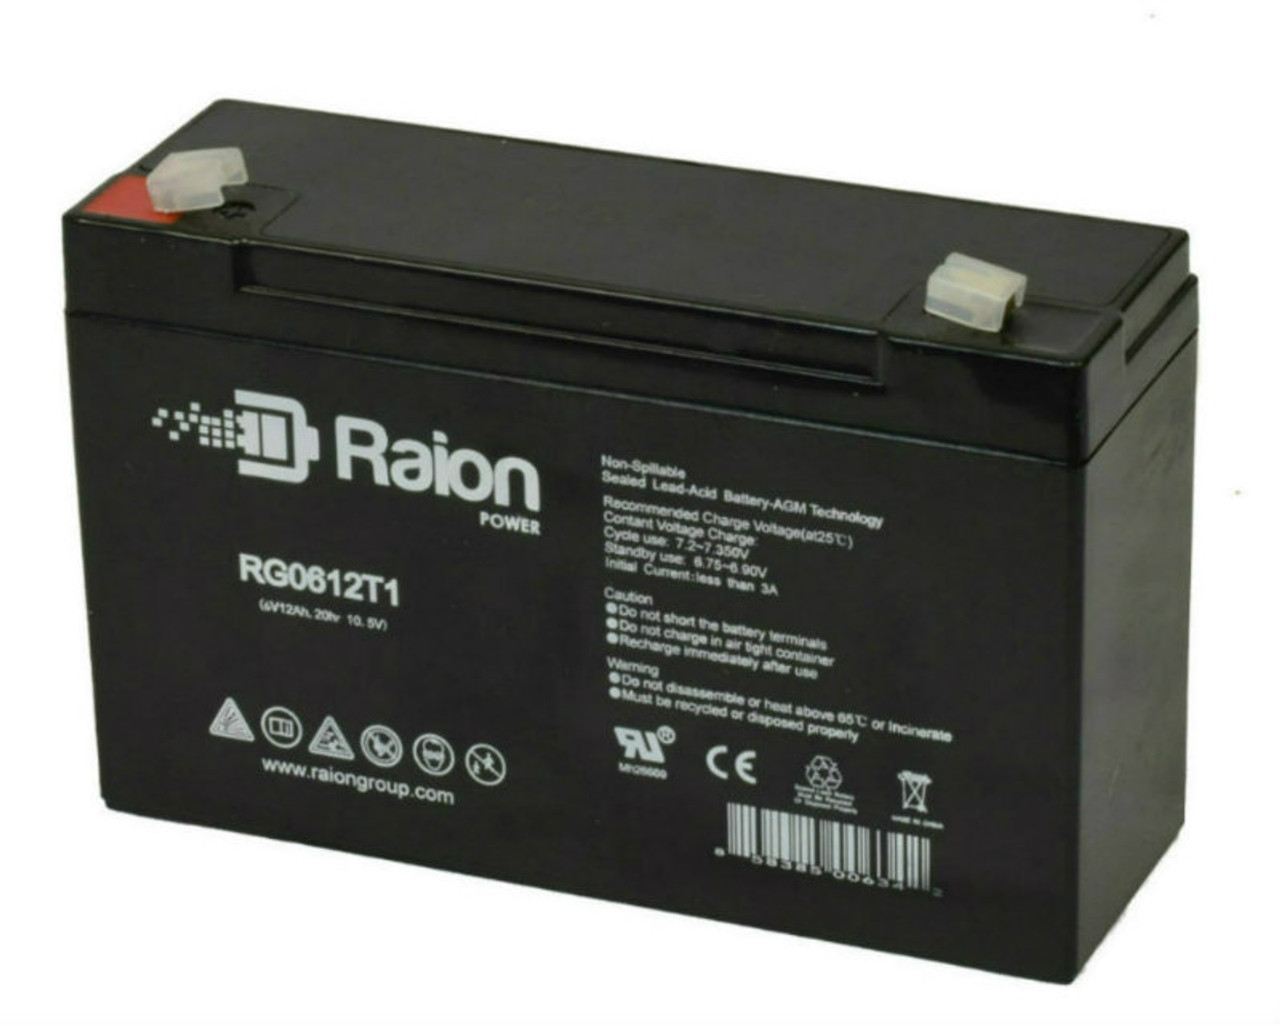 Raion Power RG06120T1 Replacement 6V 12Ah Emergency Light Battery for Chloride 1000010074A